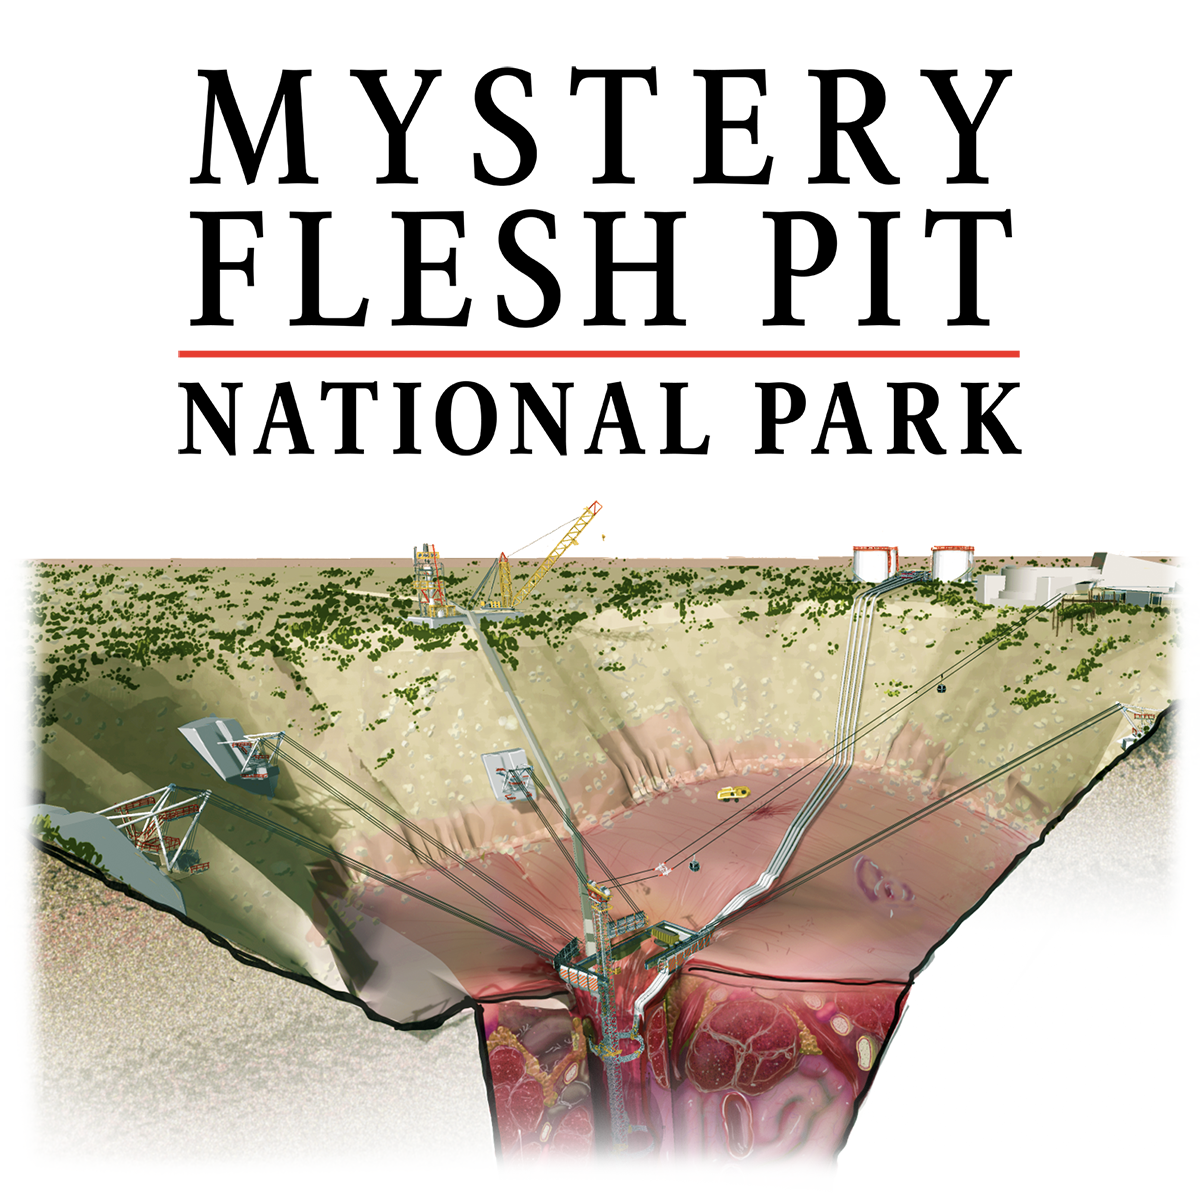 Mystery Flesh Pit National Park 01.png